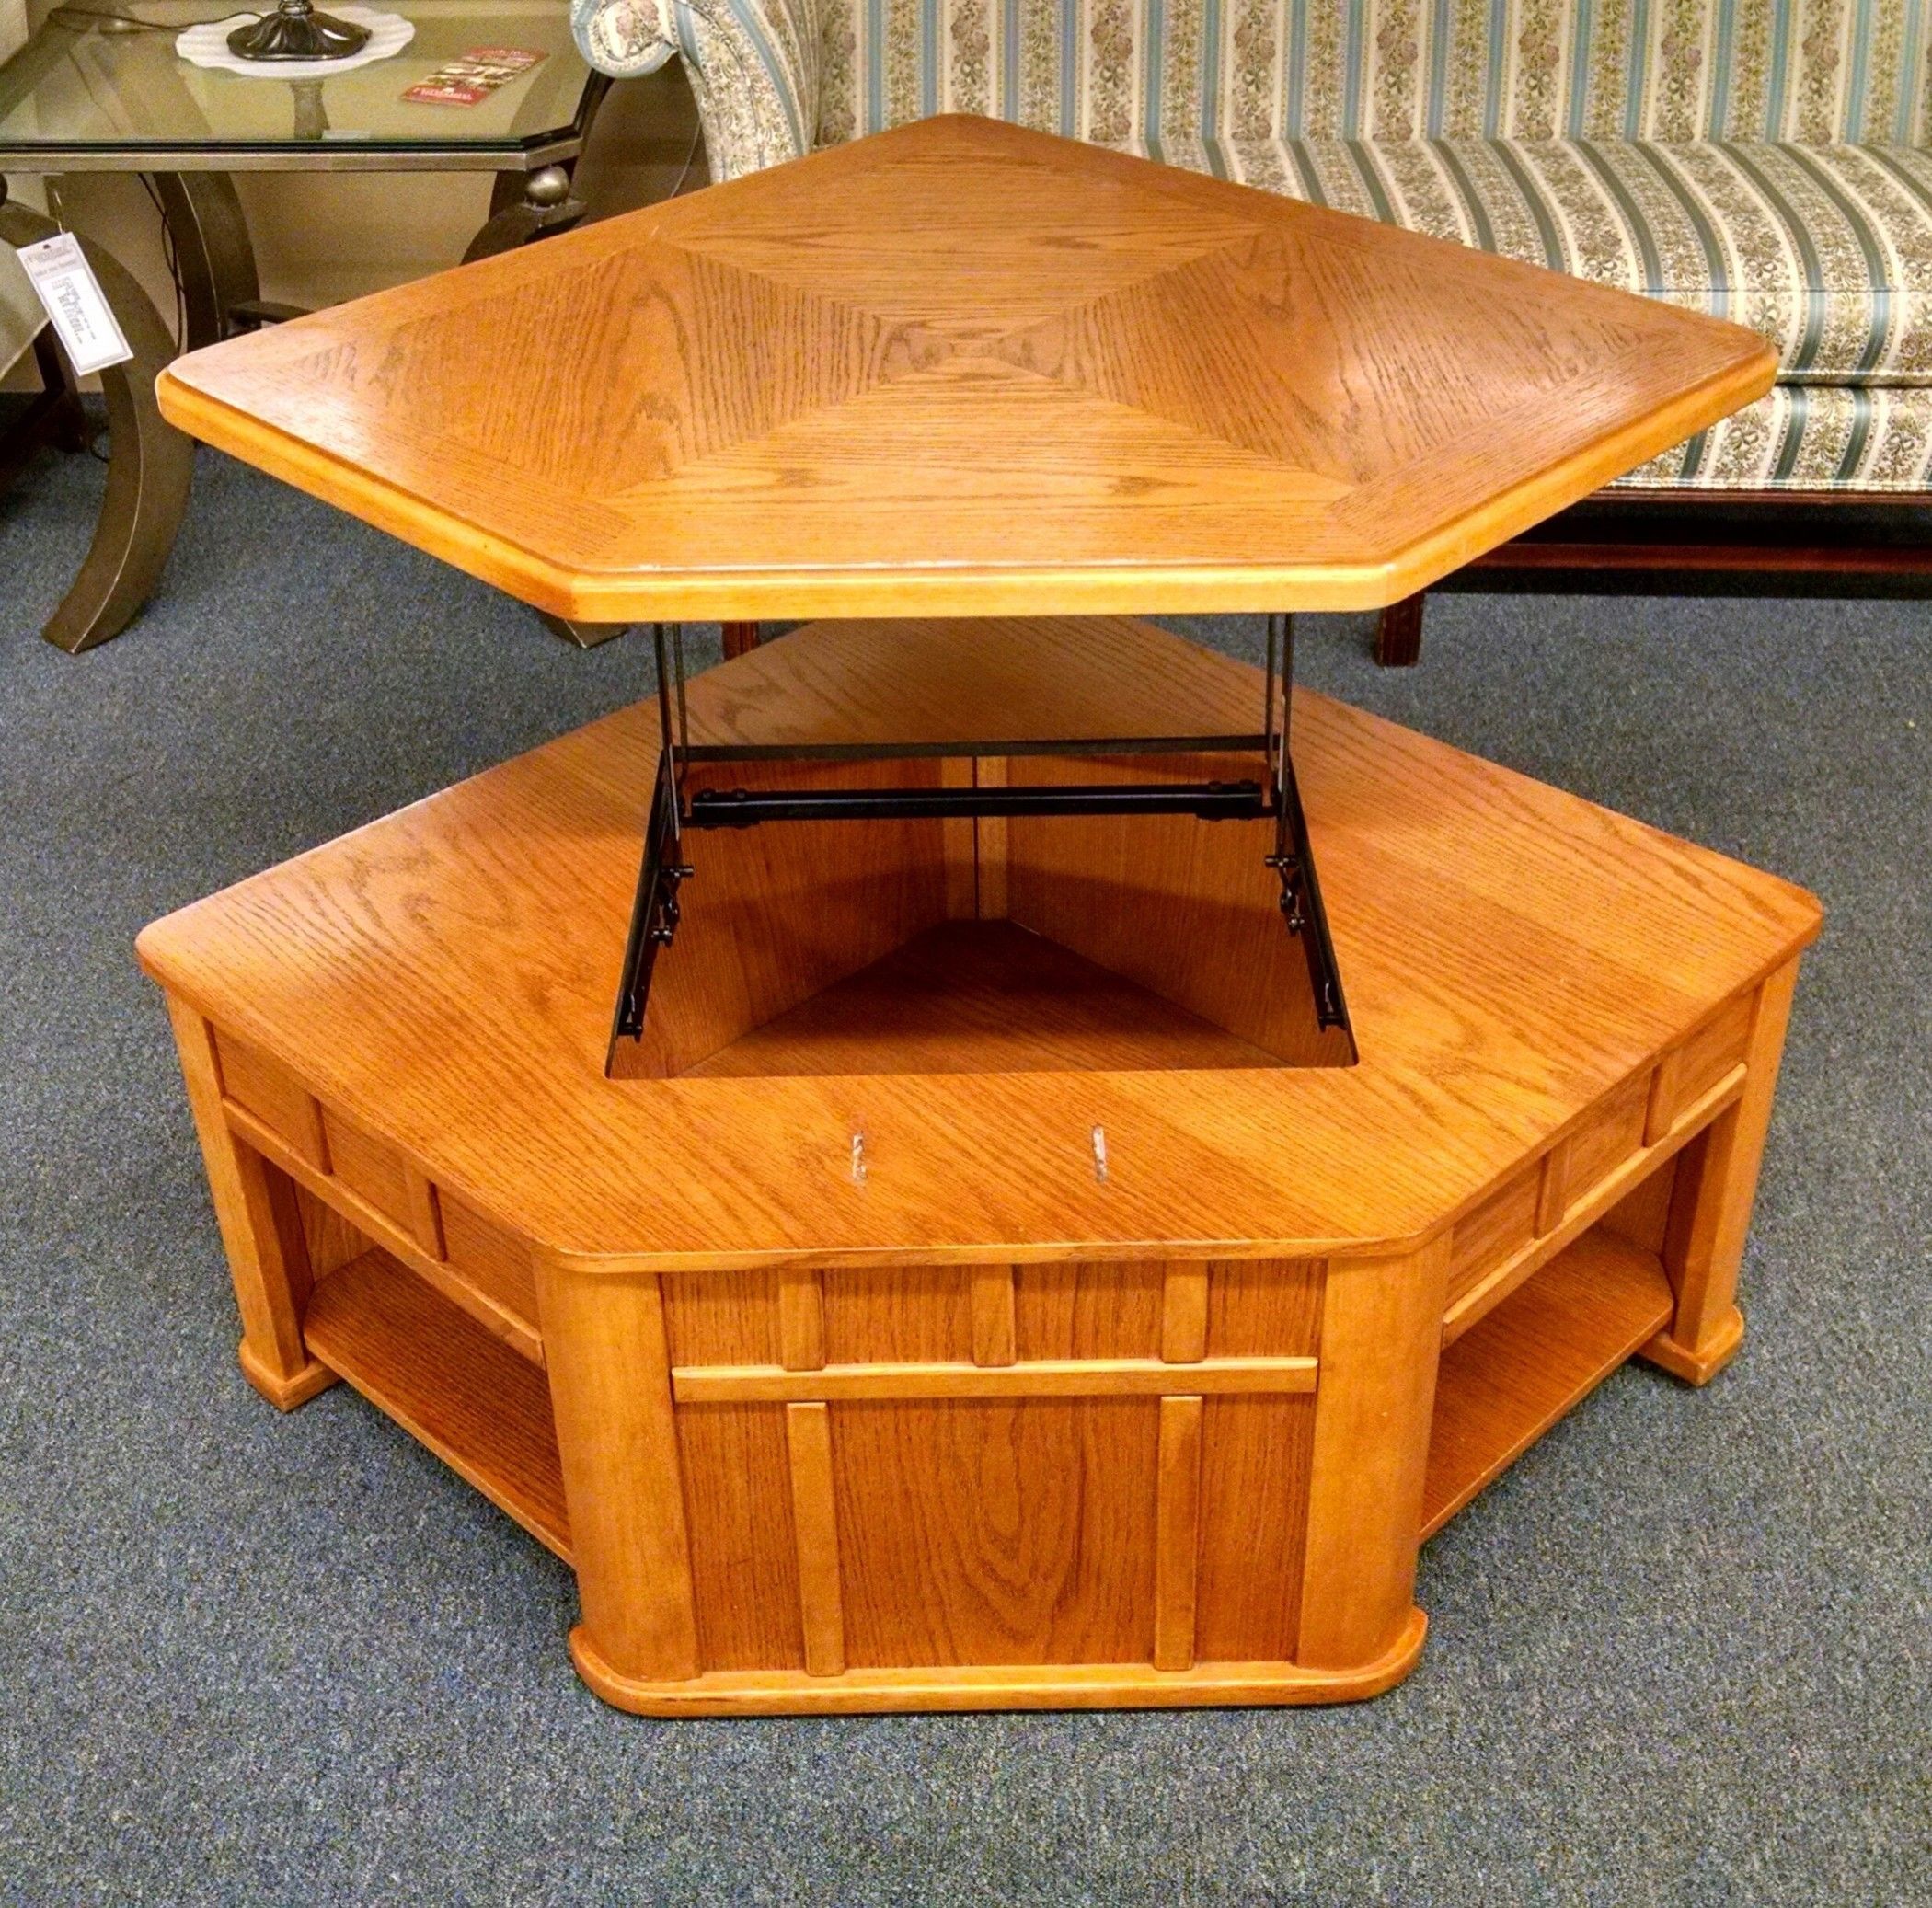 Oak Lift Top Coffee Table | Delmarva Furniture Consignment Regarding Wood Lift Top Coffee Tables (View 8 of 15)